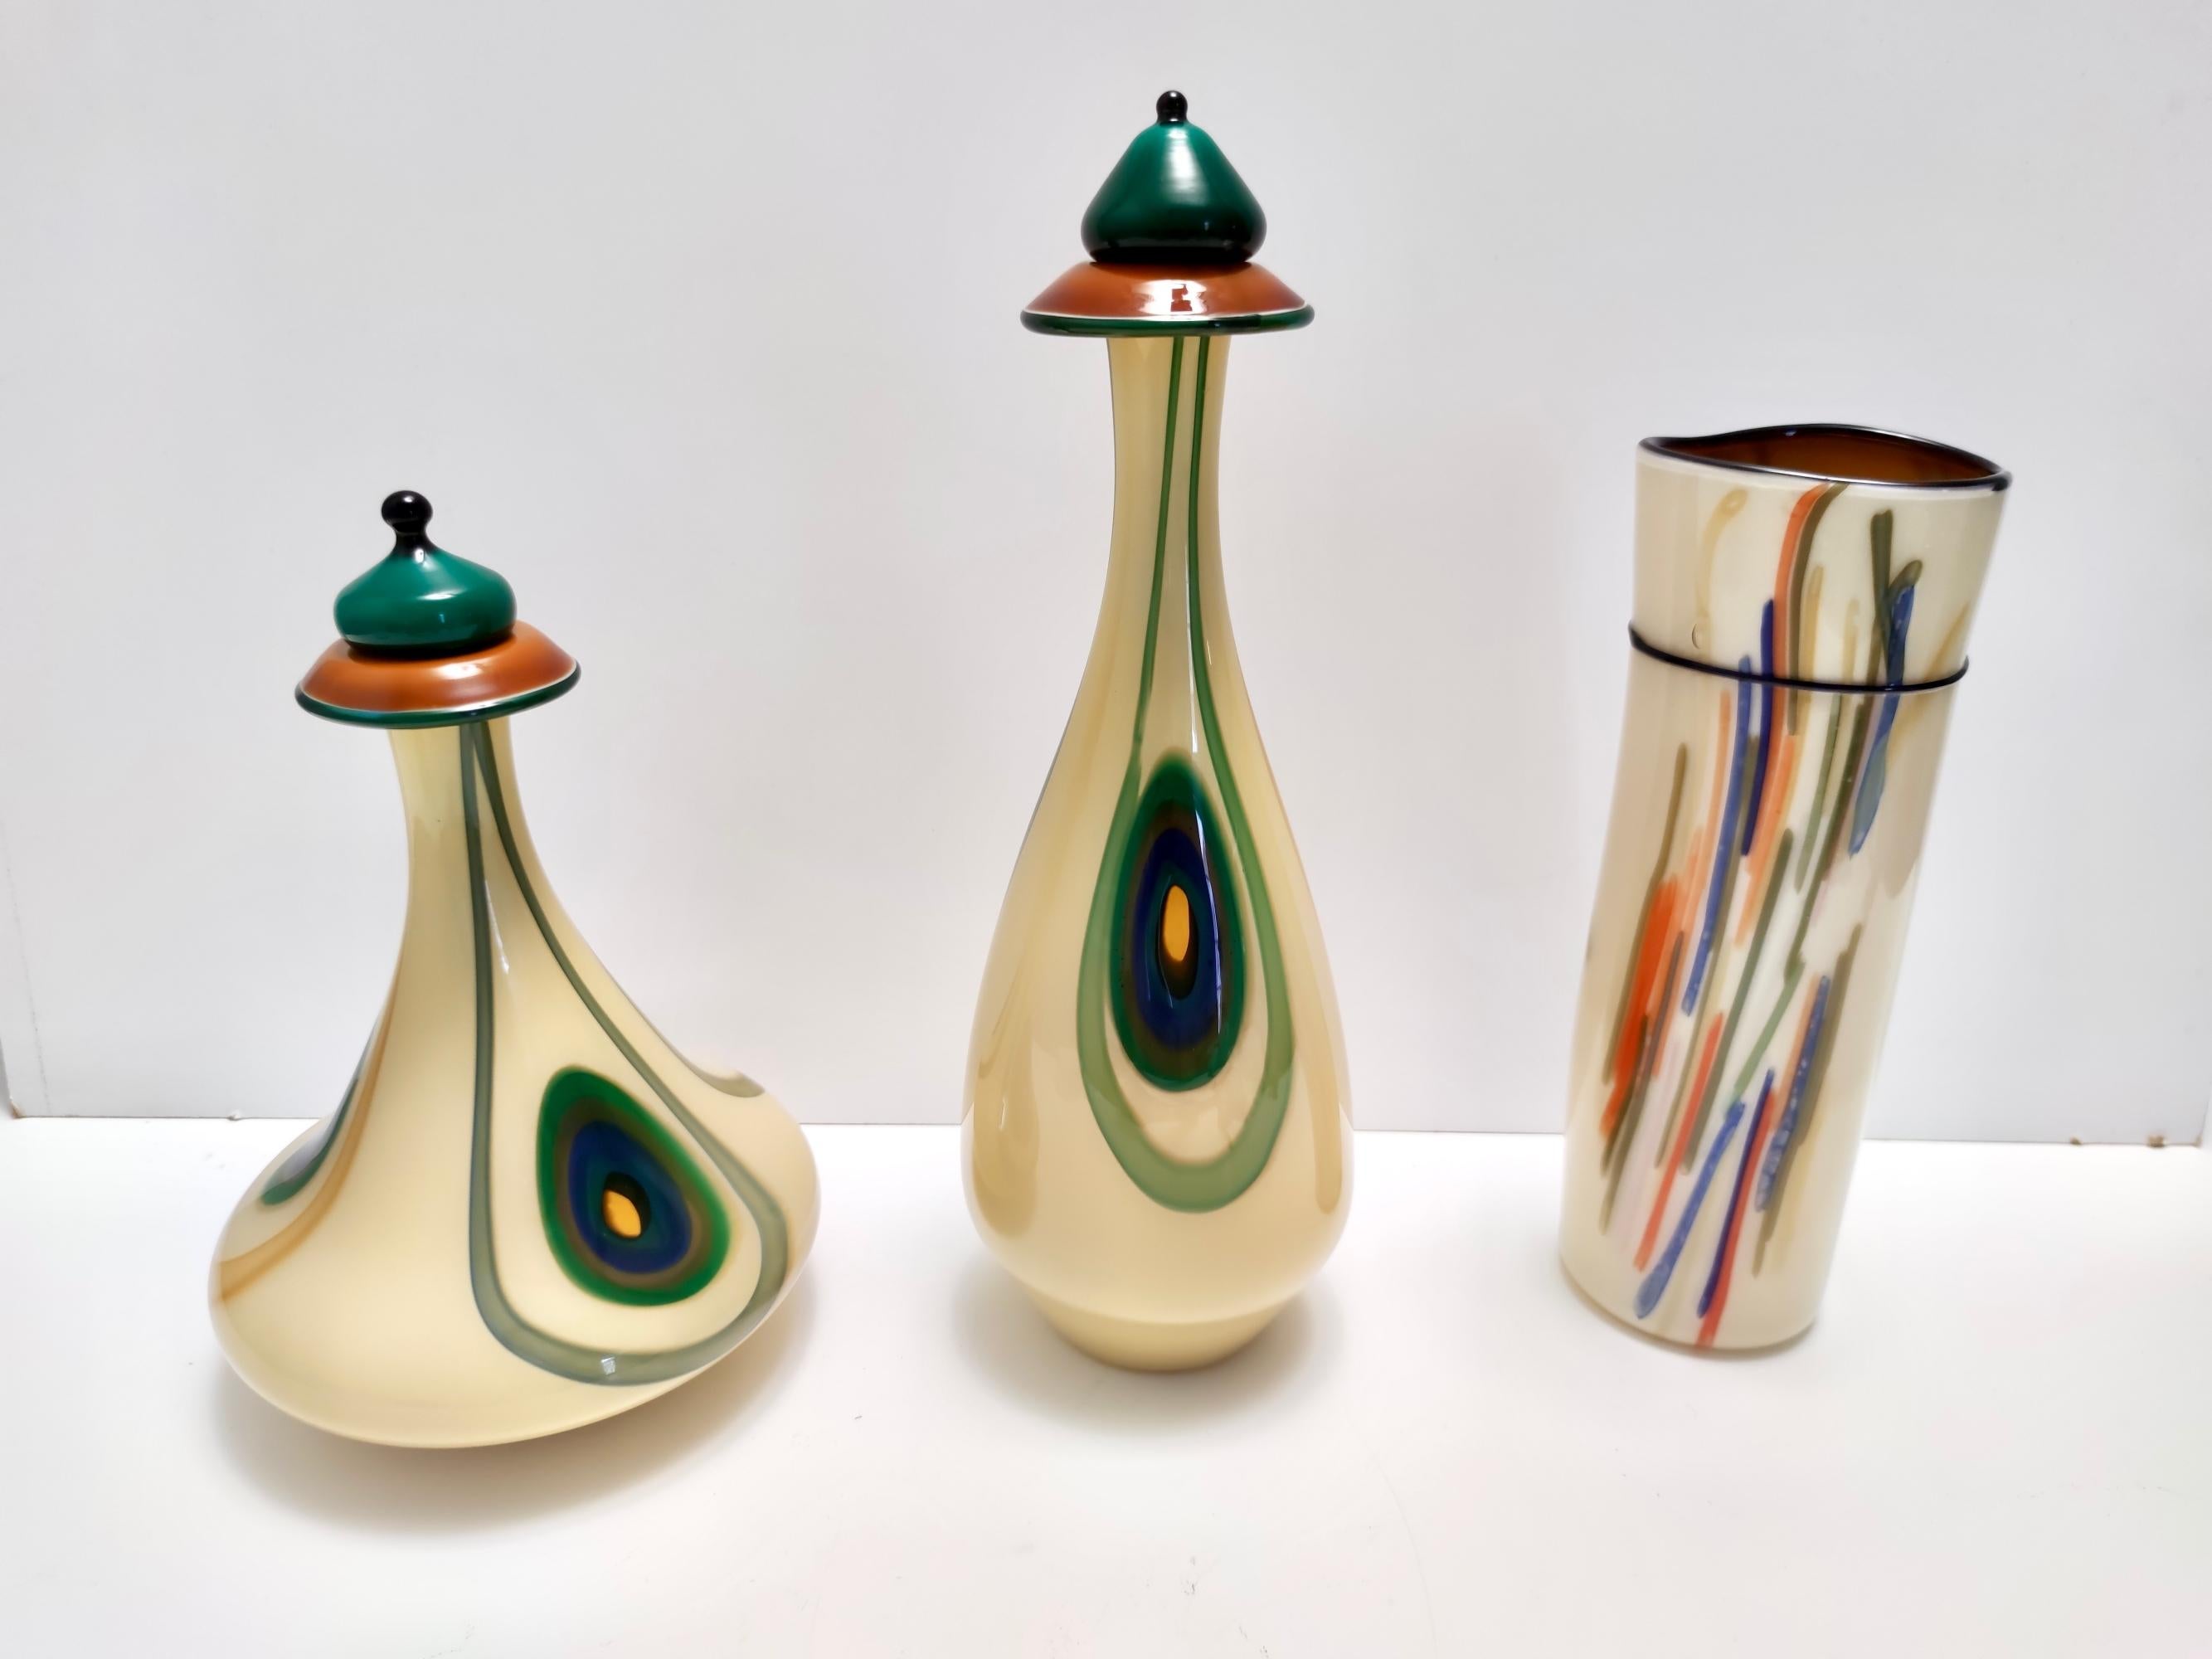 Made in Italy, 1960s - 1970s.
This decanter bottle is part of a three-piece set. 
It is made in three-color encased glass with green edges and murrines.  
This is a vintage item, therefore it might show slight traces of use, but it can be considered